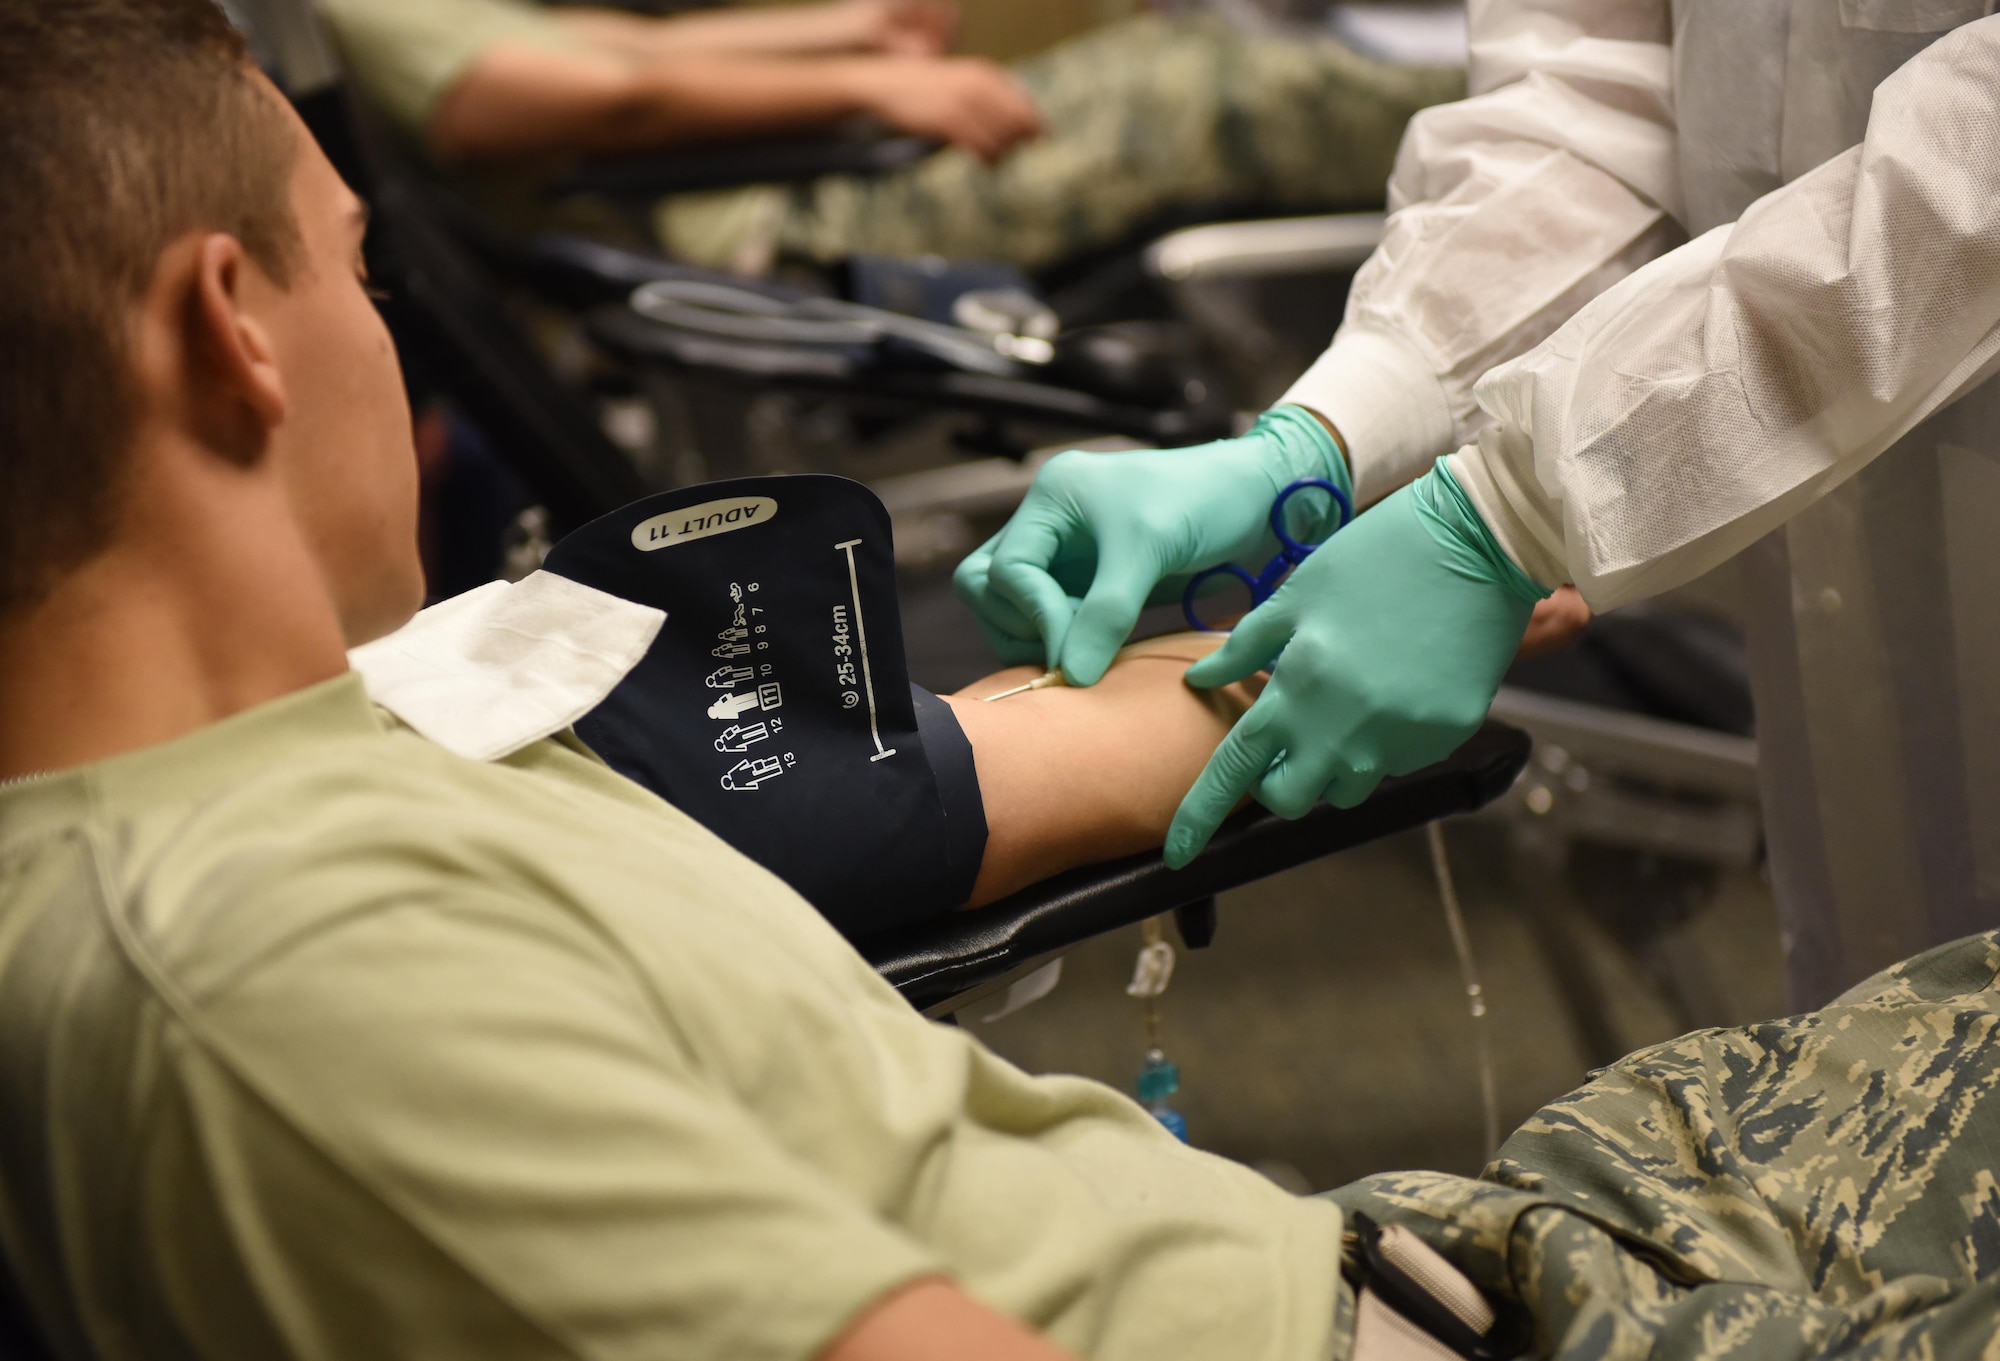 Rhonda McNair, 81st Diagnostic and Therapeutics Squadron phlebotomist, draws blood from Airman Basic Dylan Quinones, 338th Training Squadron student, during a blood drive at Cody Hall Nov. 21, 2016, on Keesler Air Force Base, Miss. The Keesler Blood Donor Center is one of three Air Force blood donor centers and supports the Armed Services Blood Program by collecting blood for the Defense Department for use in deployed locations and military treatment facilities. (U.S. Air Force photo by Senior Airman Holly Mansfield)  